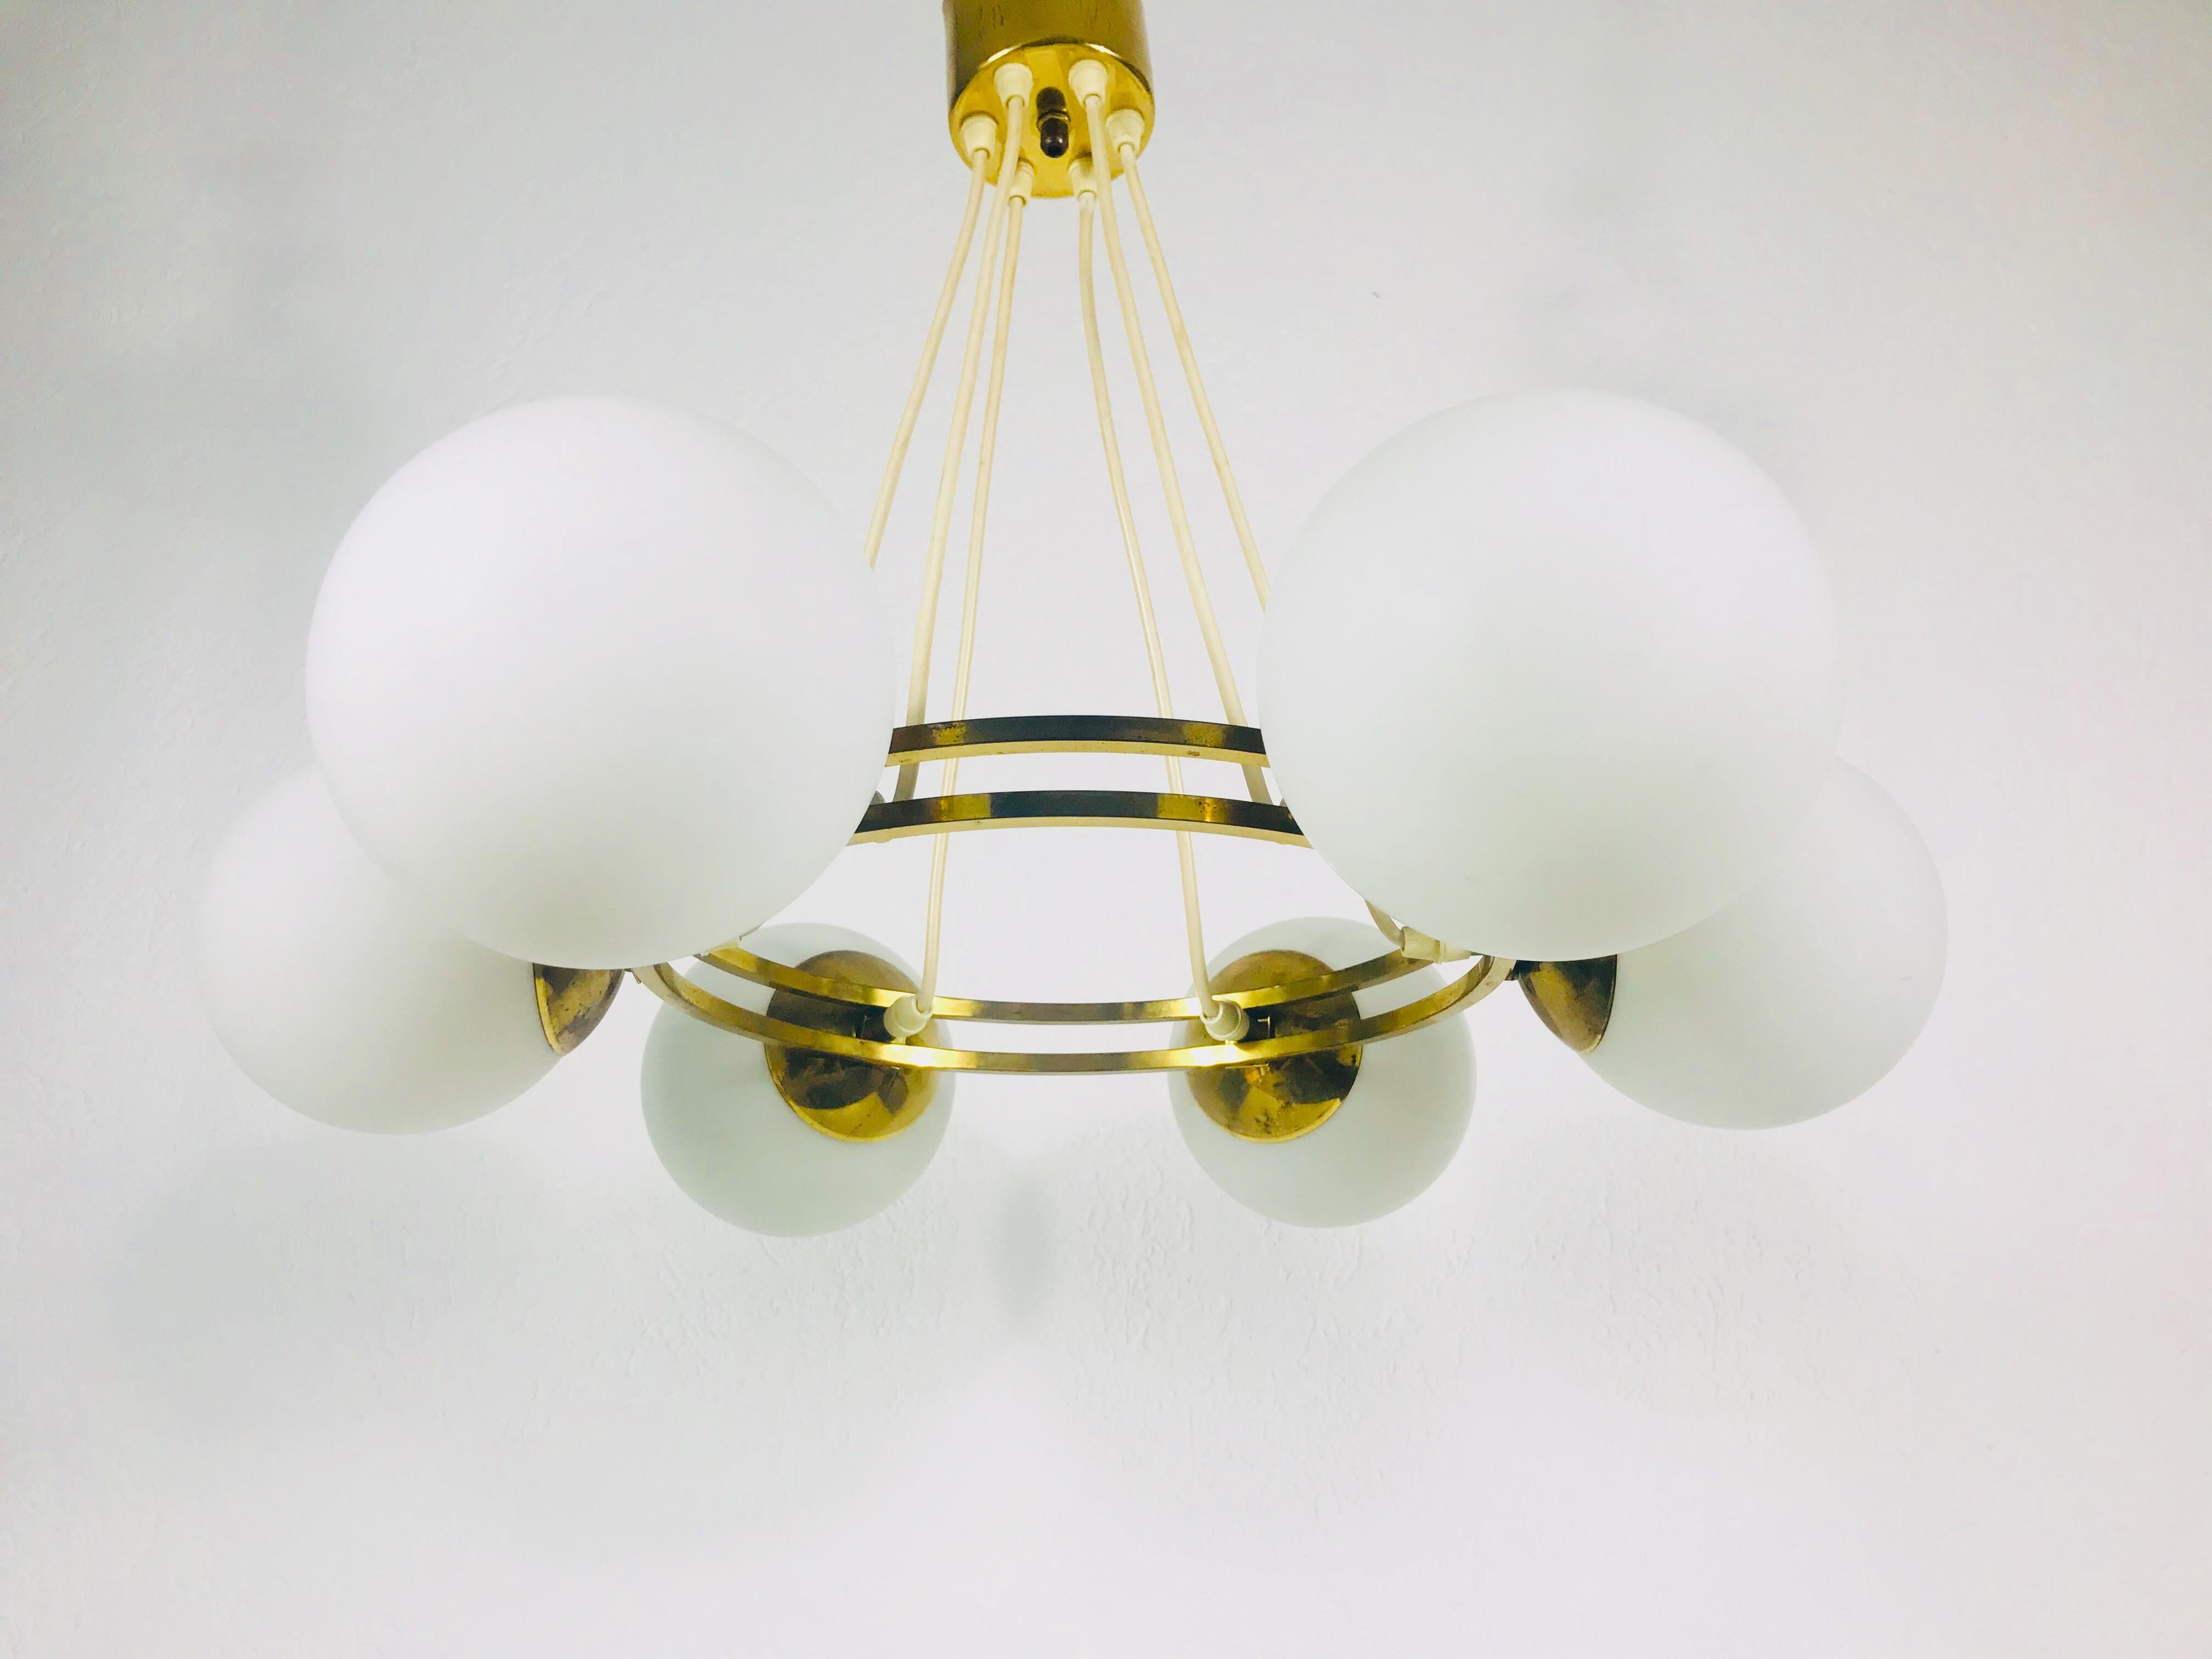 A midcentury Kaiser chandelier made in Germany in the 1960s. It is fascinating with its Space Age design and six opaline glass balls. The circular body of the light is made of polished brass, including the arms. 

Good vintage condition. The light